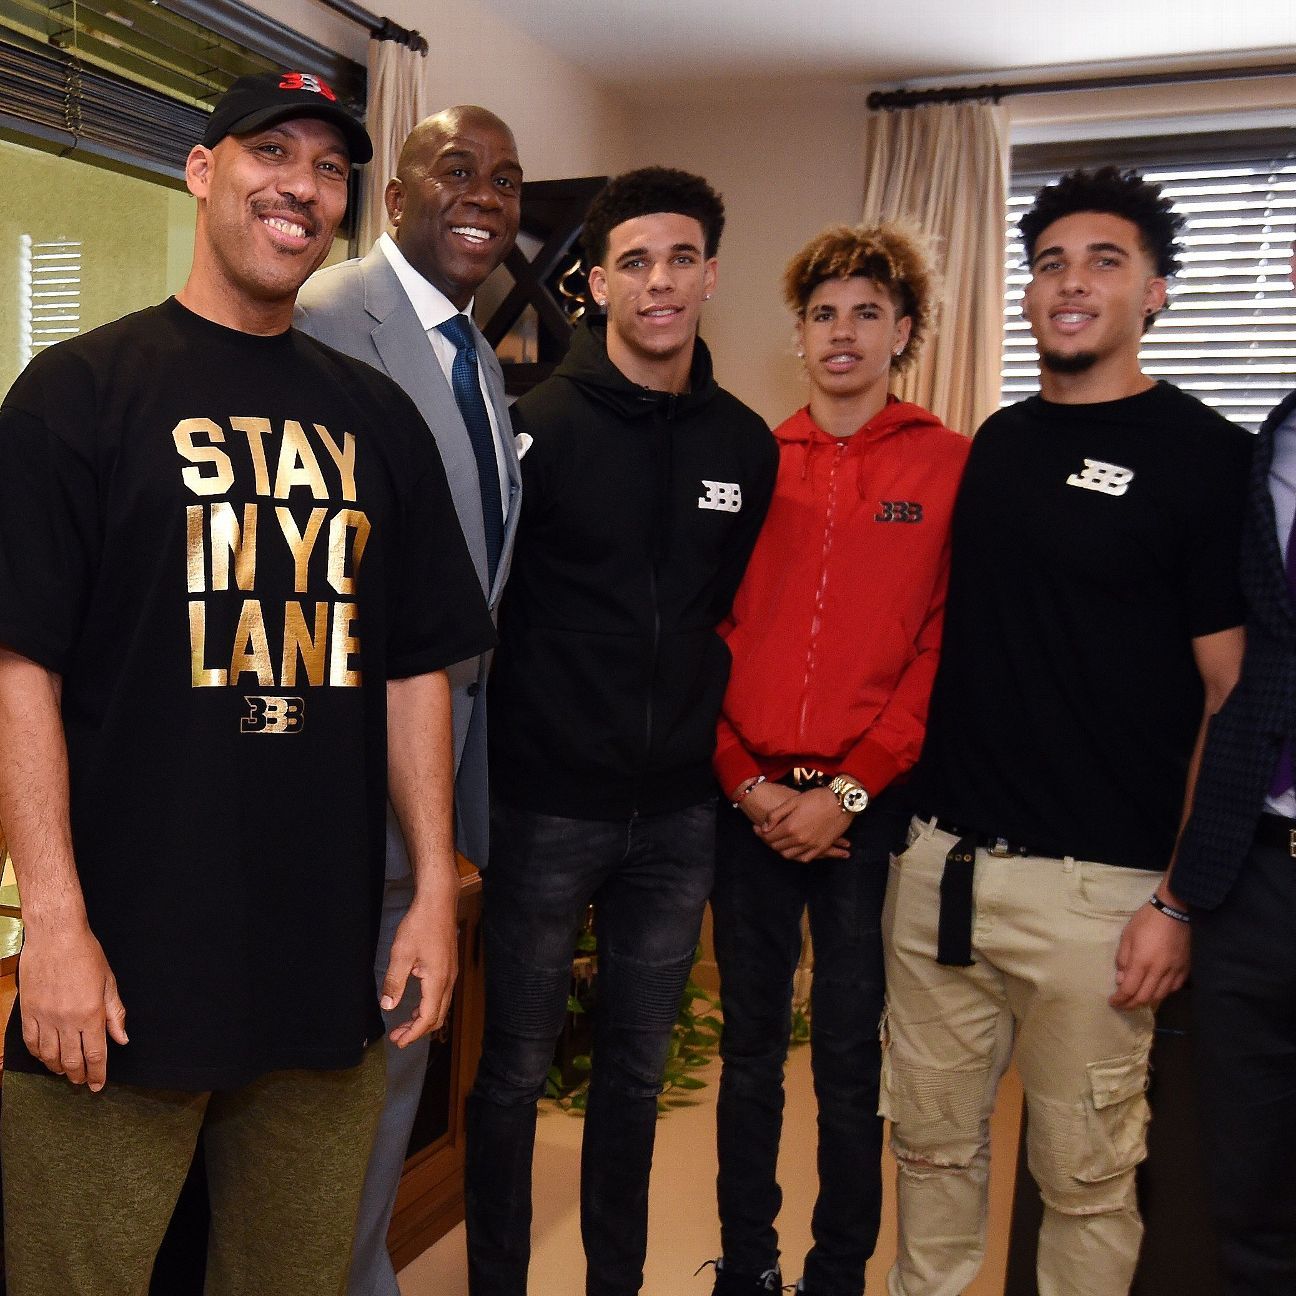 From the driveway to an NBA court, brothers Lonzo and LaMelo Ball